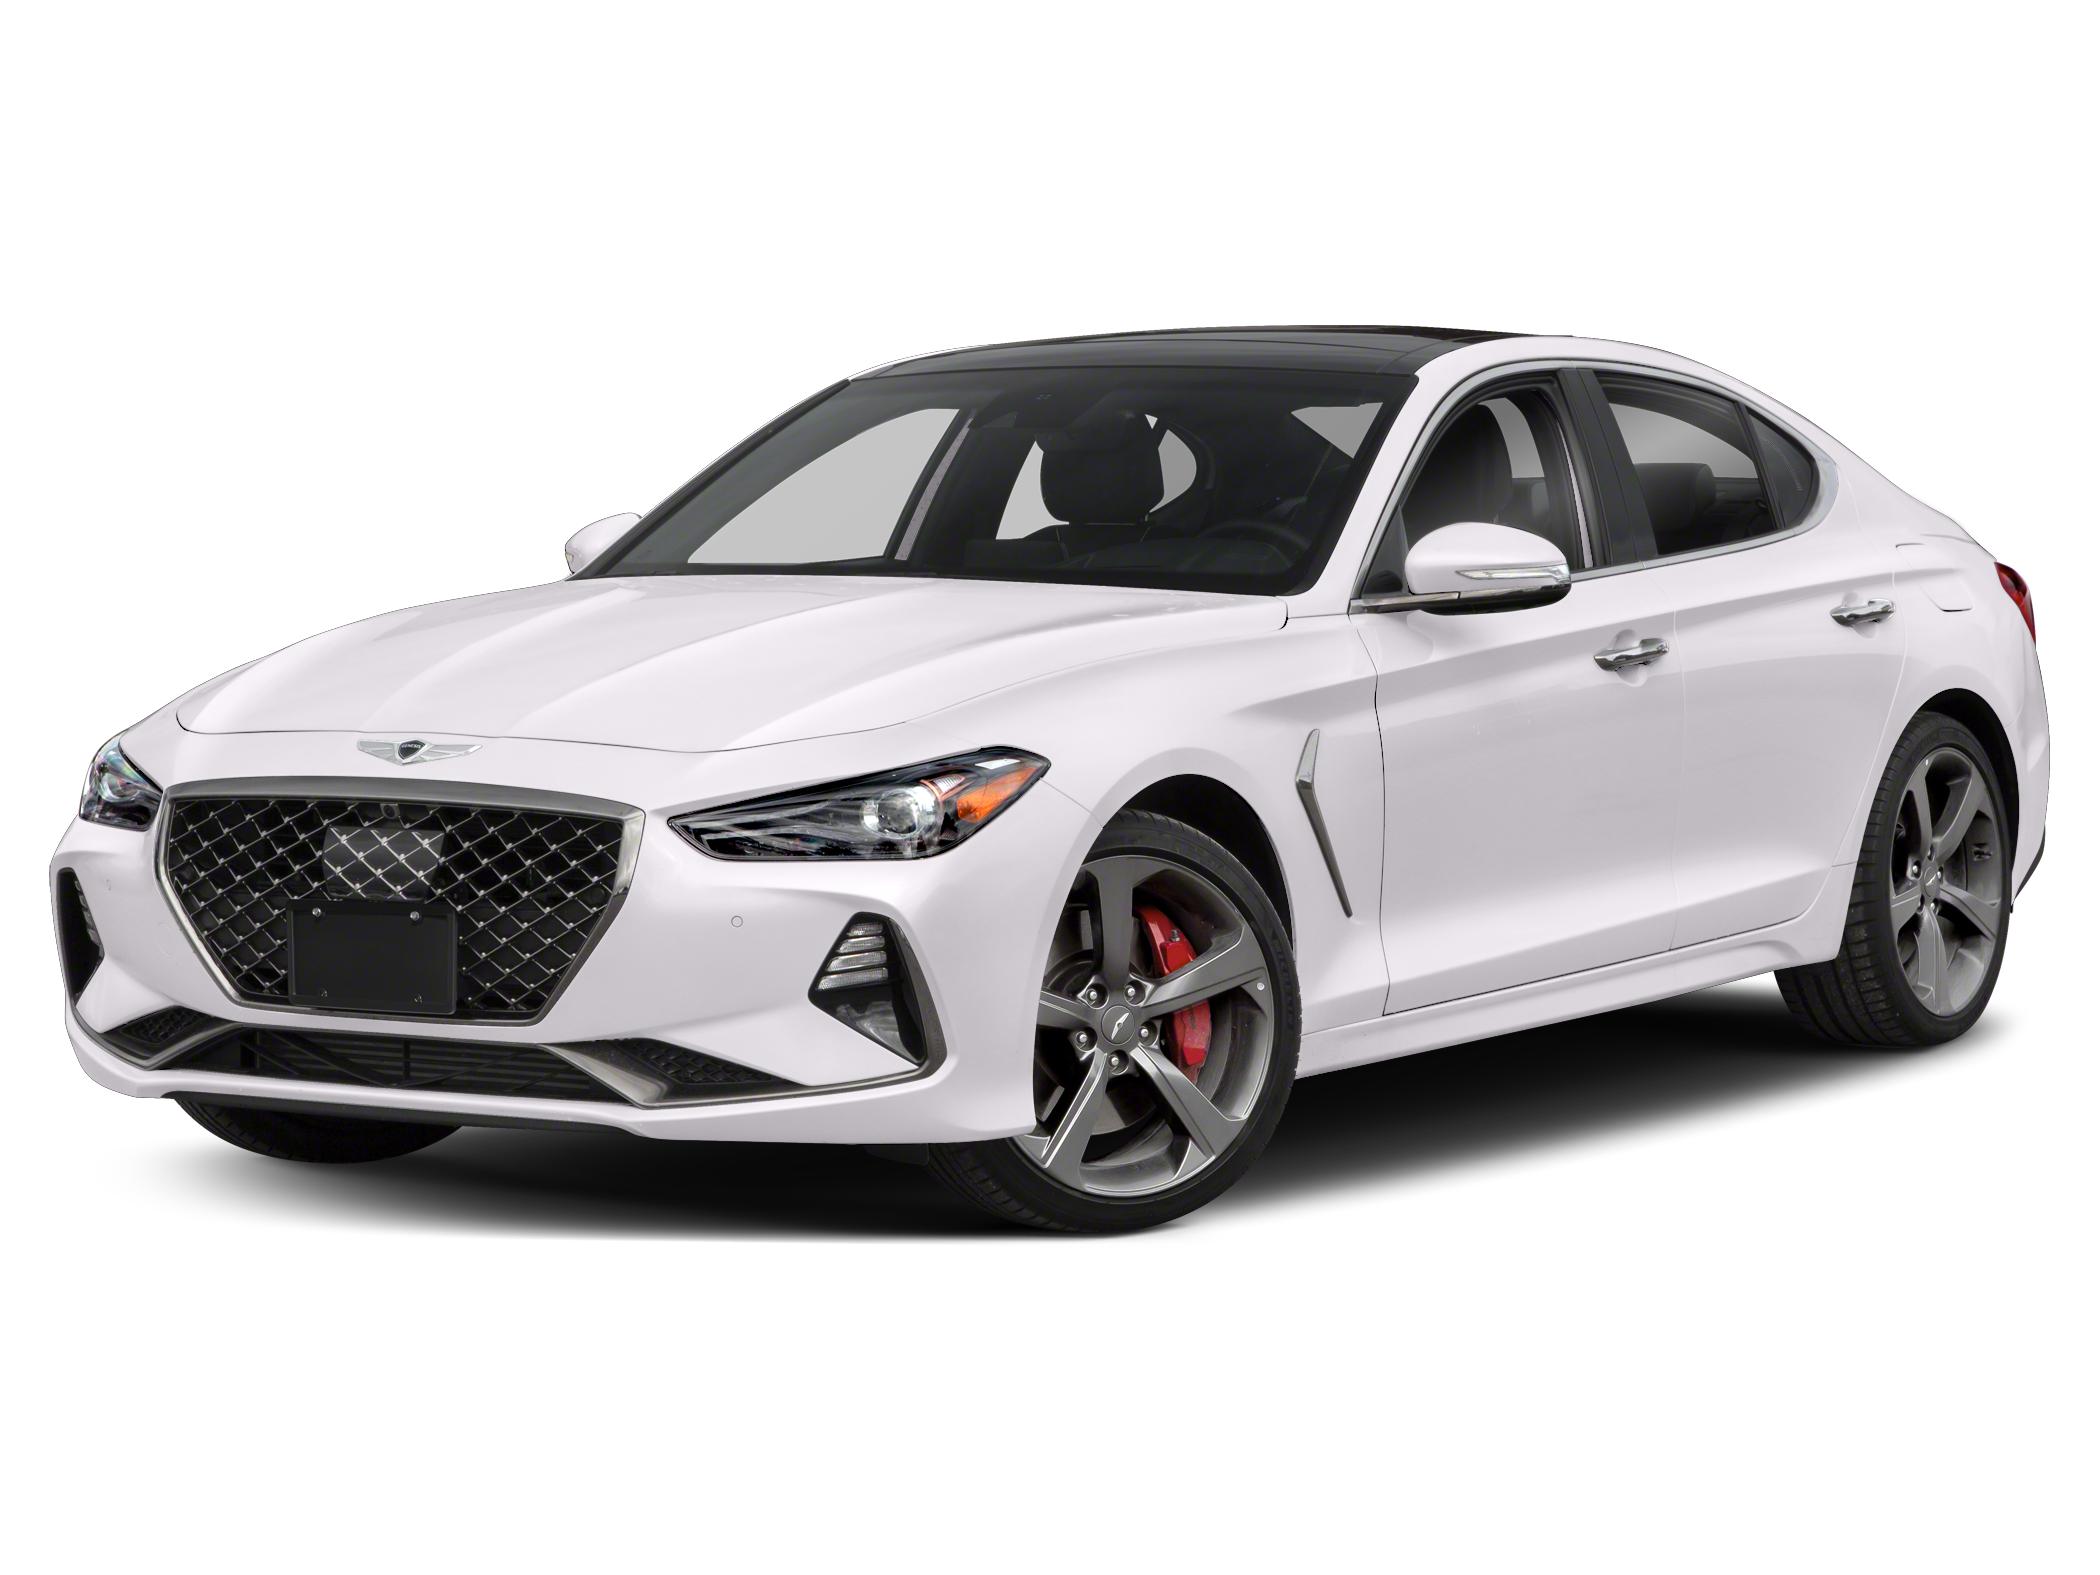 2020 Genesis G70 Reviews, Price, MPG and More | Capital One